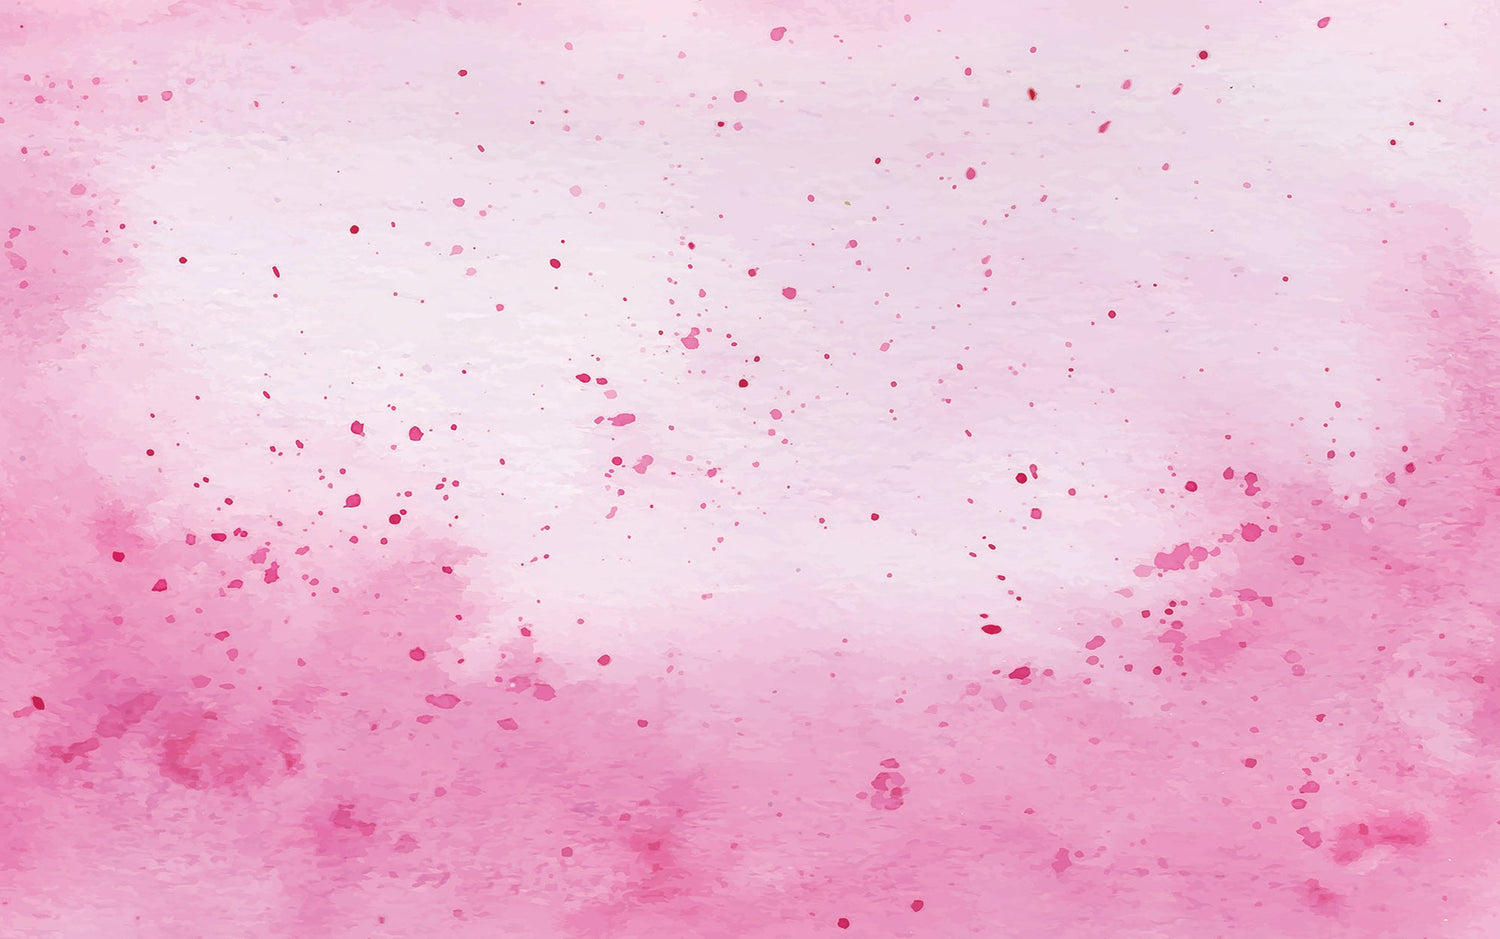 Pink watercolor texture with splatters used as a mural on a wall interior